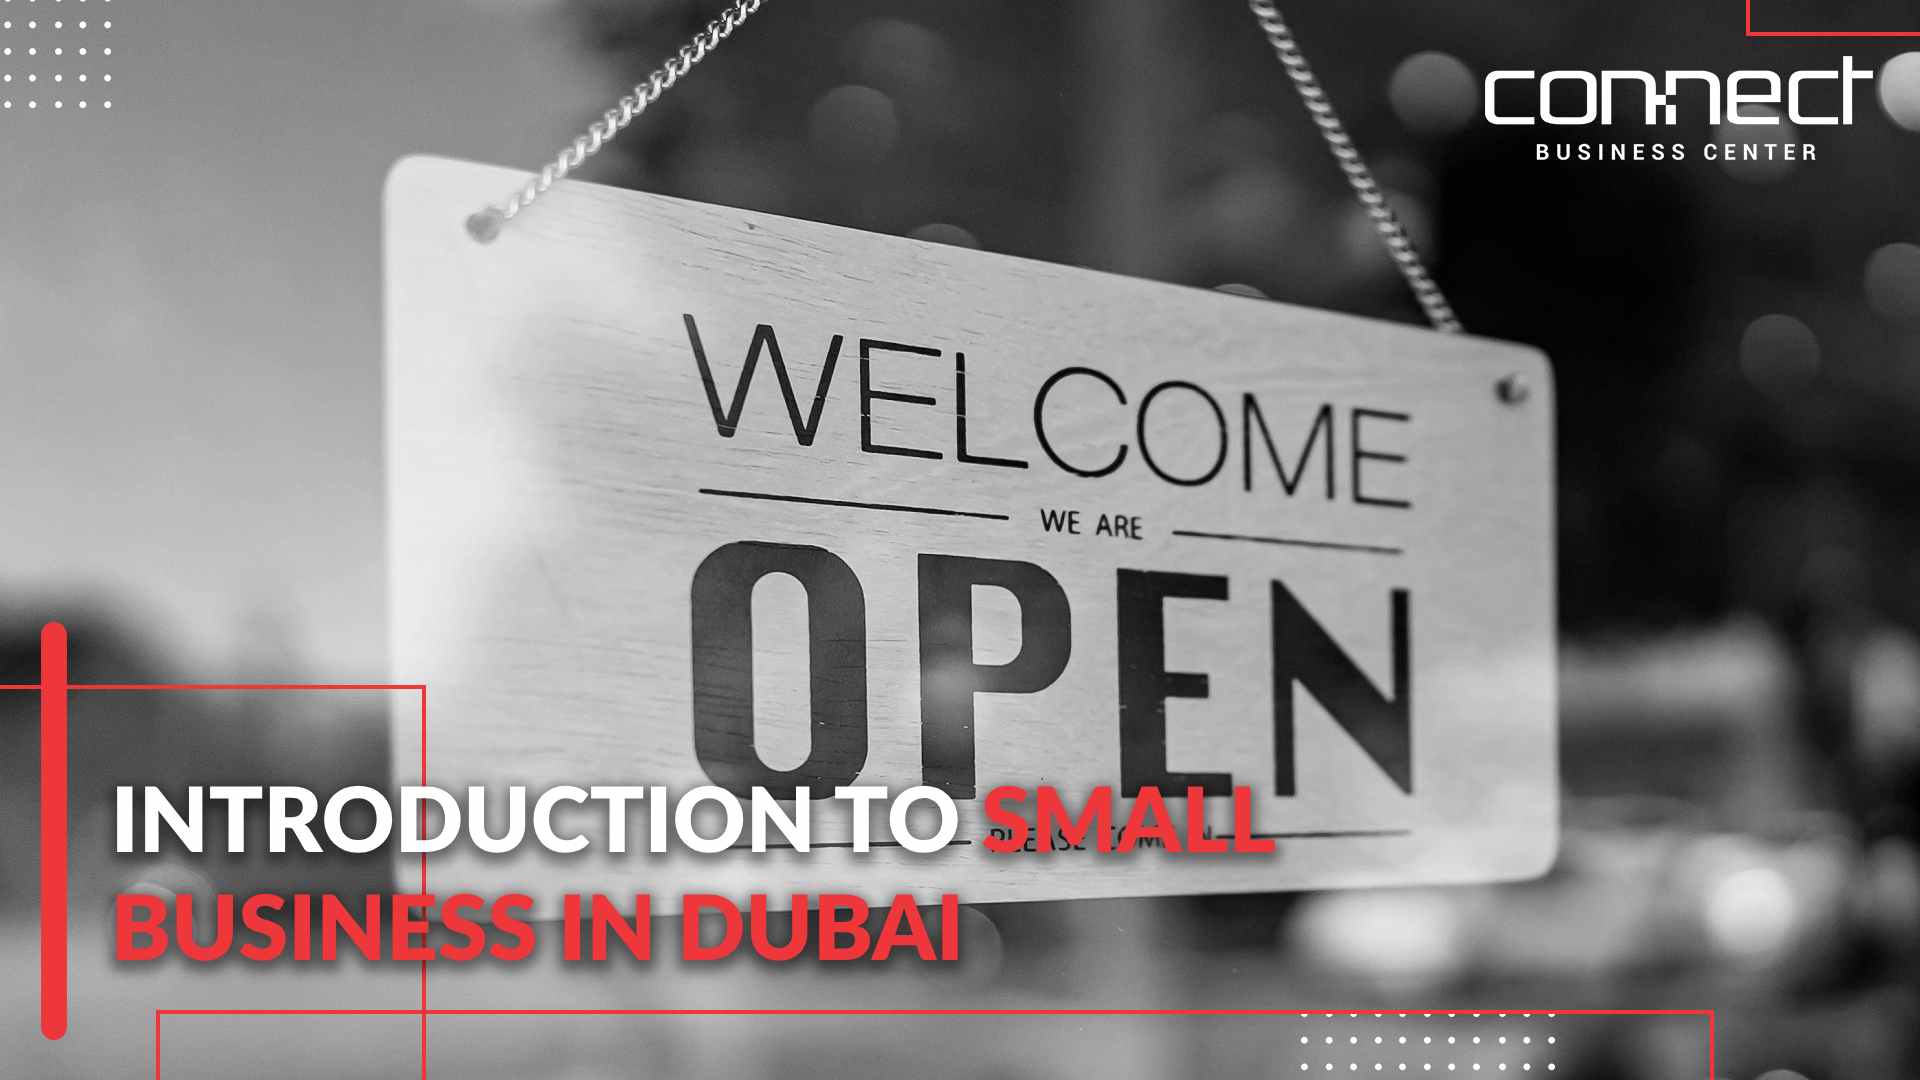 Know the process to open a small business in Dubai